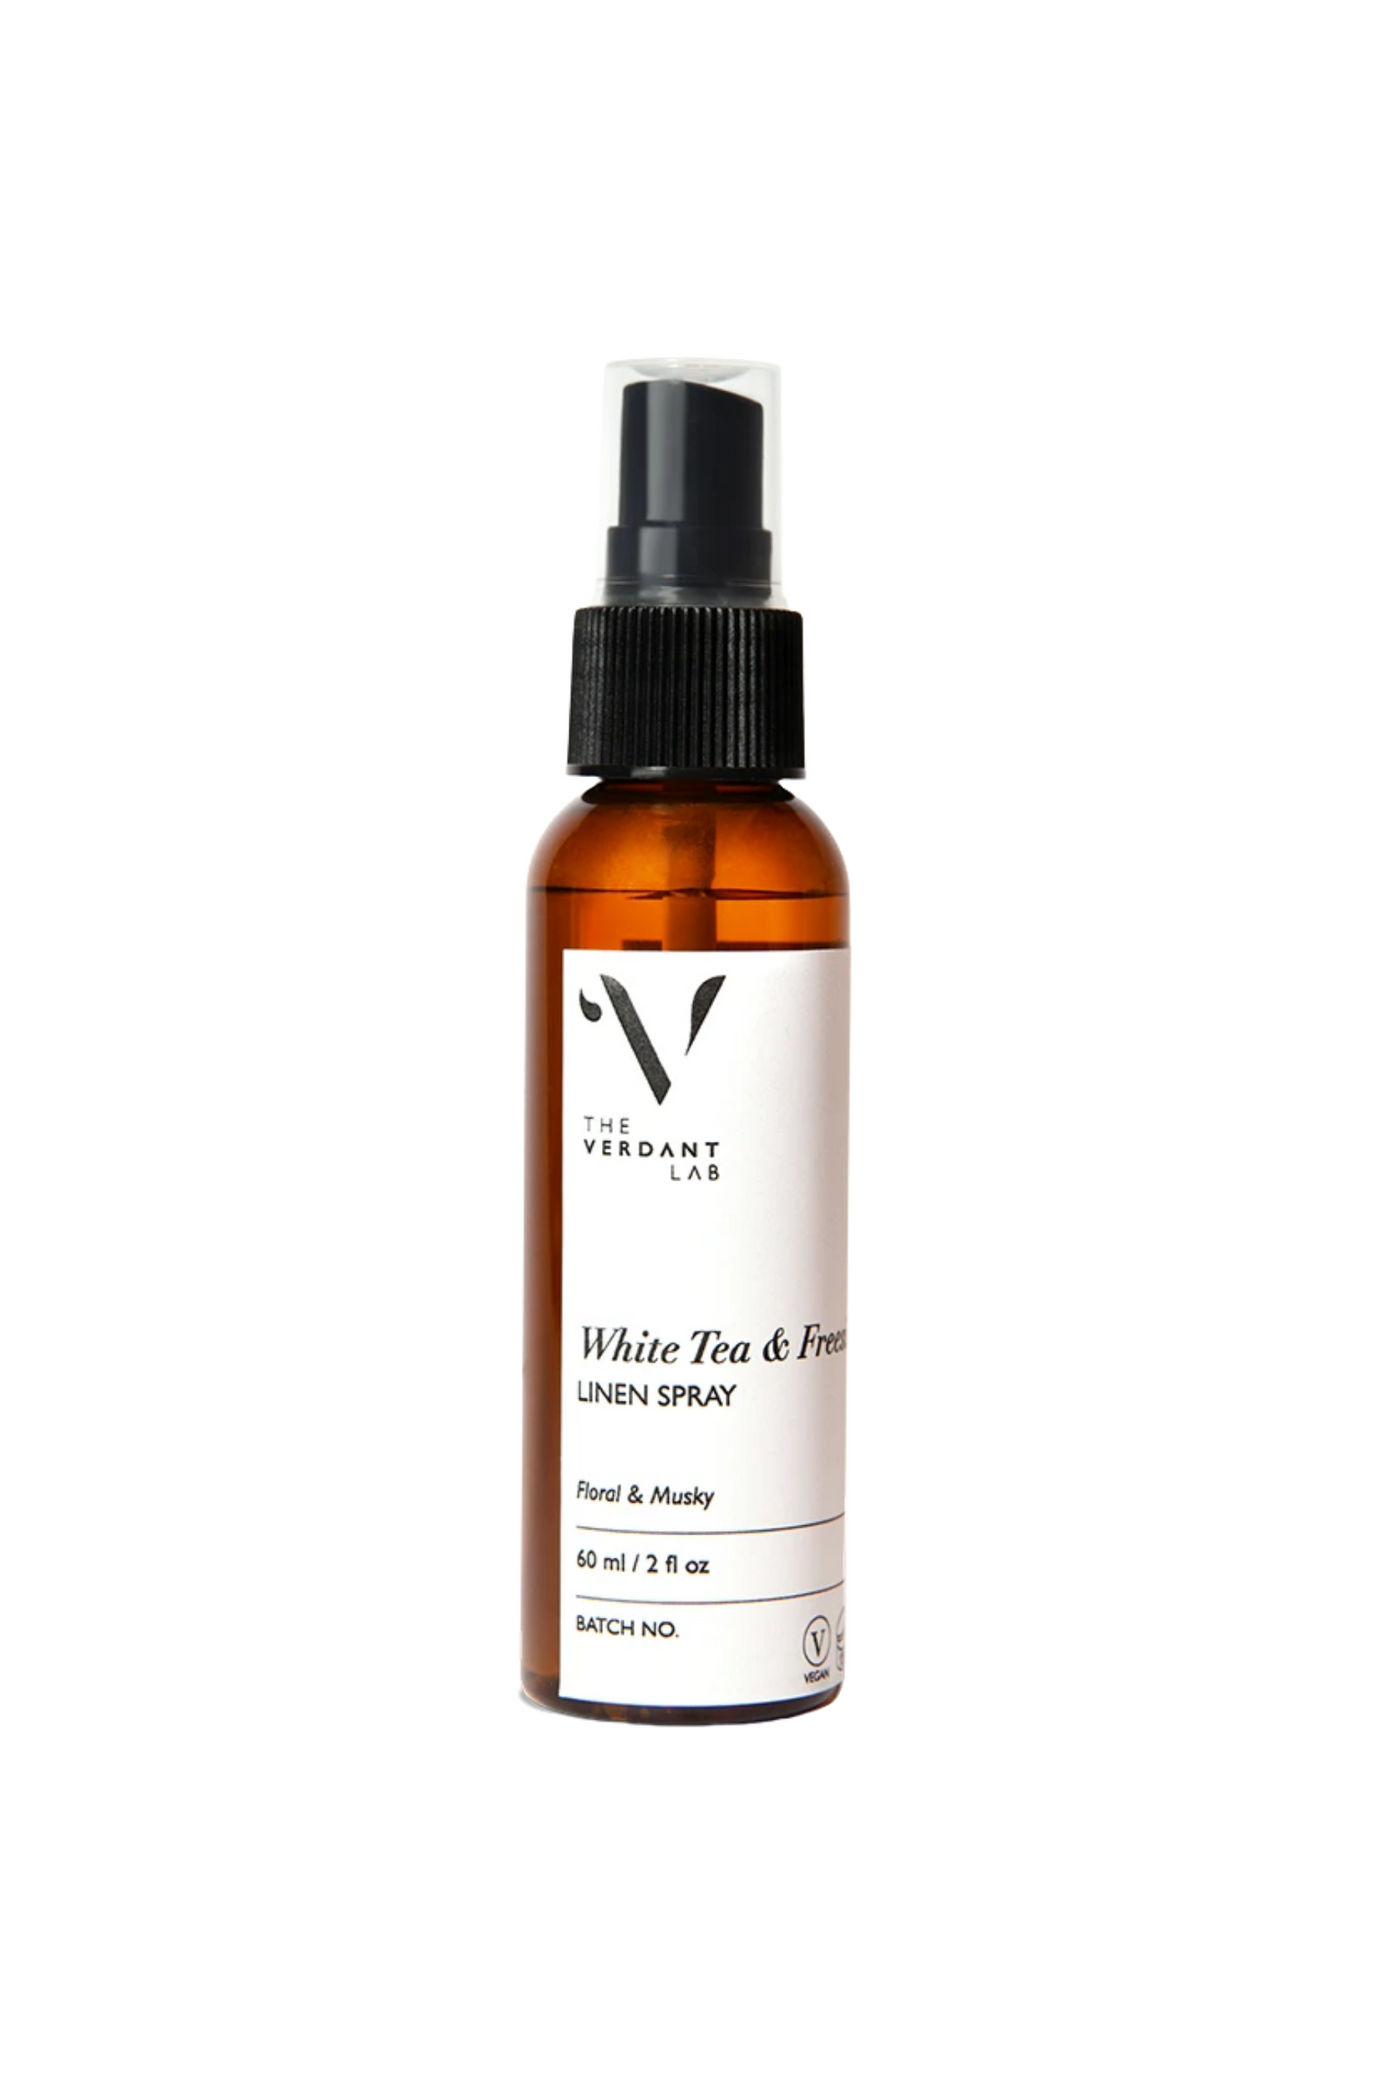 The Verdant Lab Linen Spray in White Tea & Freesia, available on ZERRIN with free Singapore shipping above $50